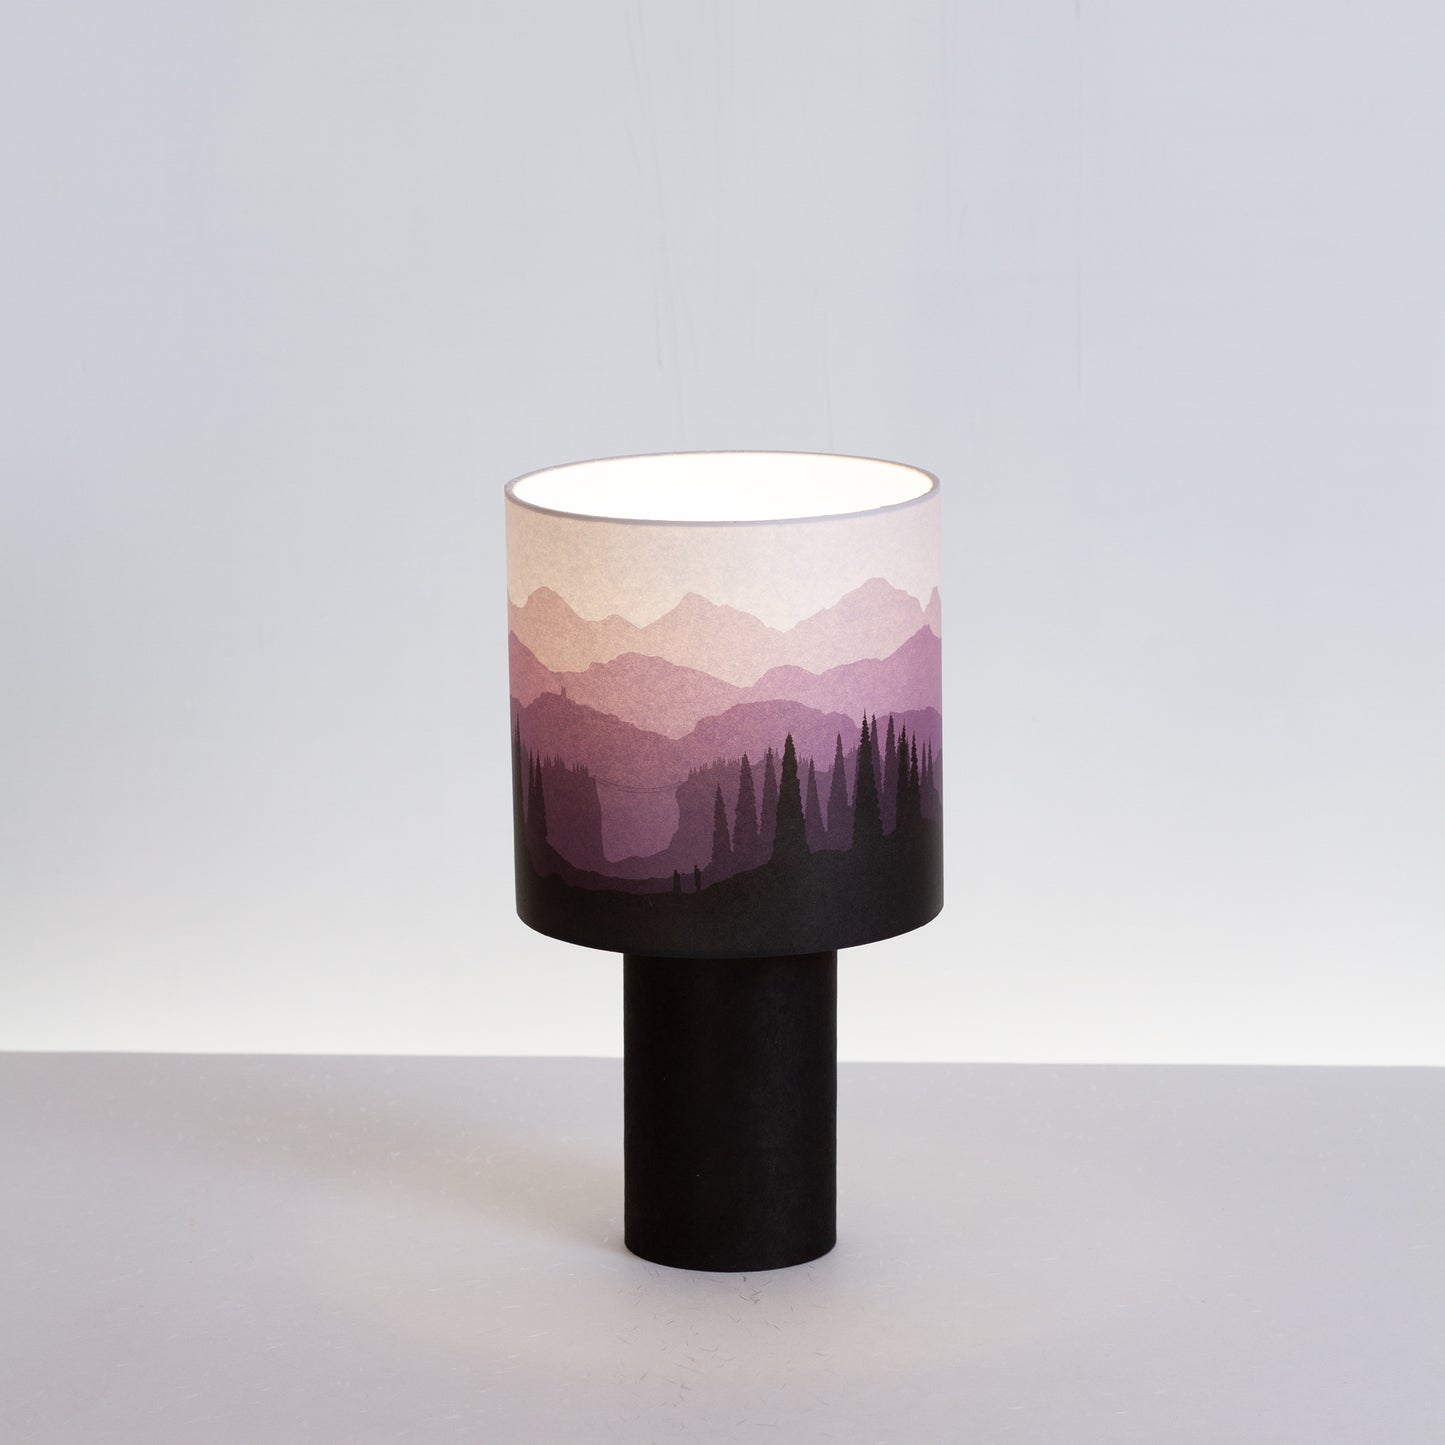 Matching Table Lamp Small with Drum Lamp Shade ~ Landscape Purple